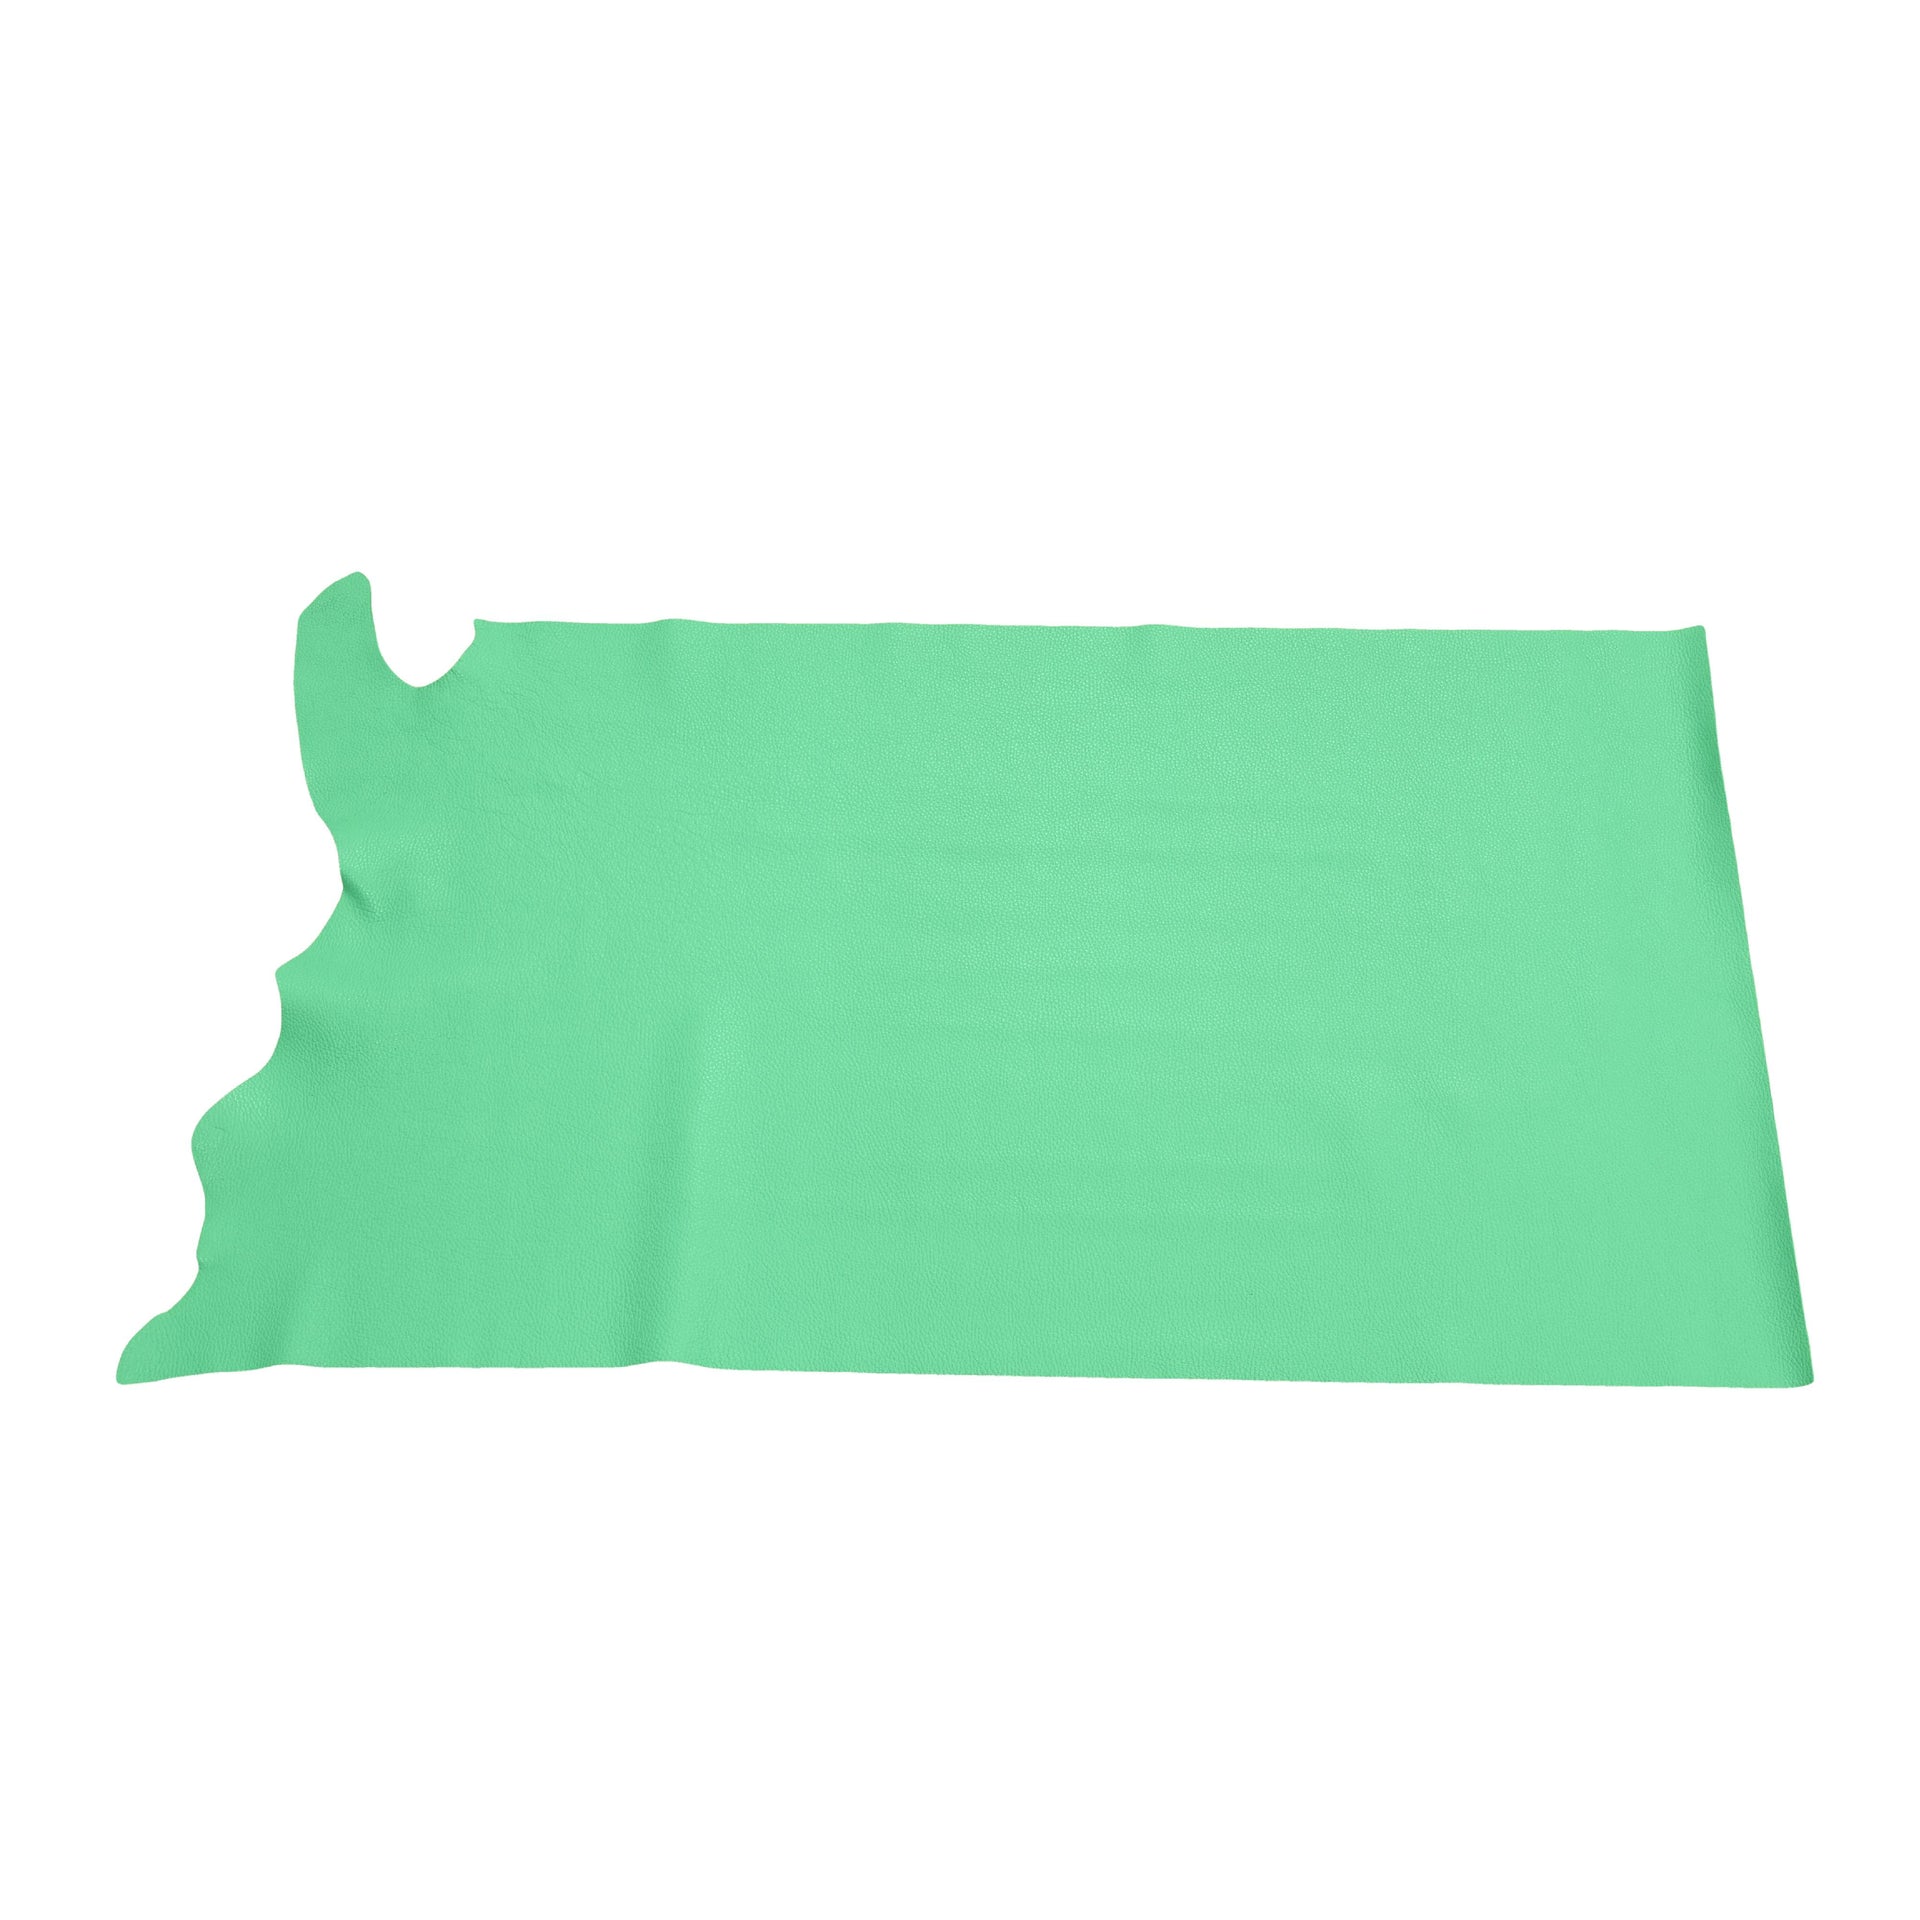 Emerald Green Coast Tried n True 3-4 oz Leather Cow Hides, 6.5-7.5 Square Foot / Project Piece (Middle) | The Leather Guy